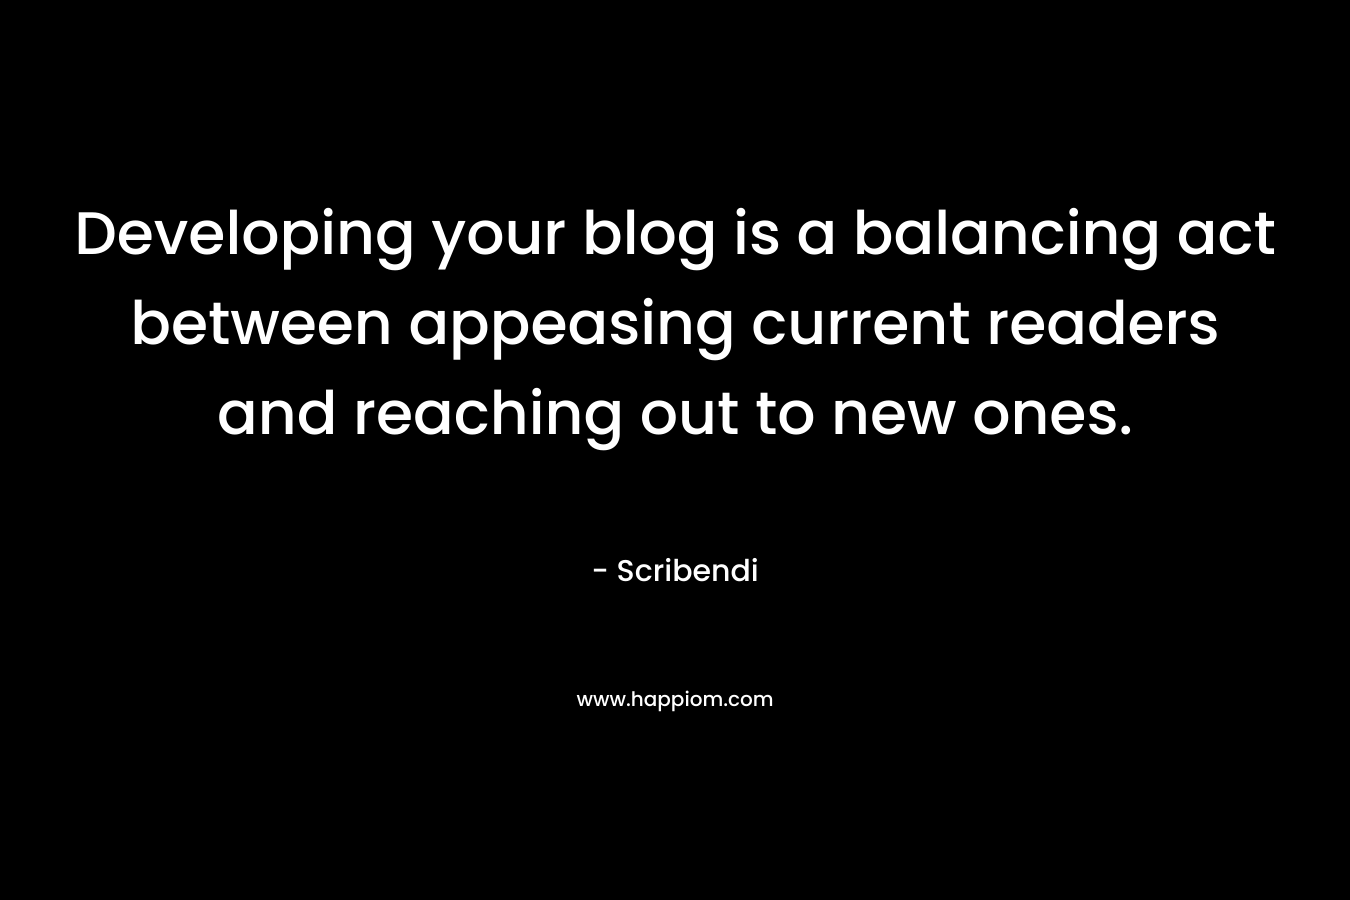 Developing your blog is a balancing act between appeasing current readers and reaching out to new ones. – Scribendi